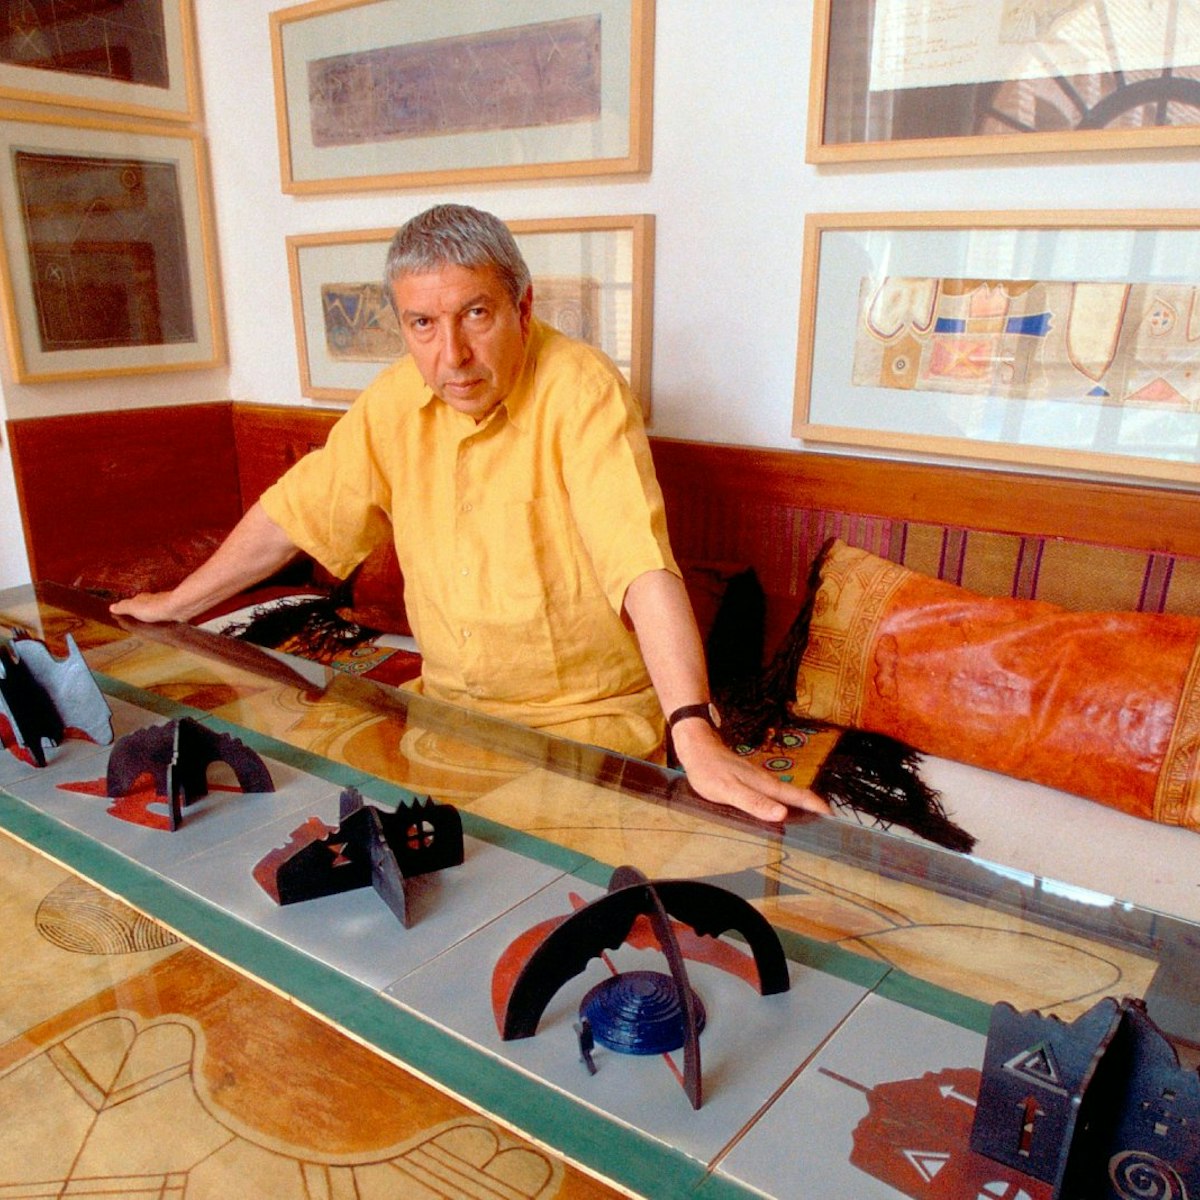 MOROCCO - CIRCA 2001:  Morrocan painter Farid Belkahia in Marrakech, Morocco in 2001.  (Photo by Jean-Luc MANAUD/Gamma-Rapho via Getty Images)